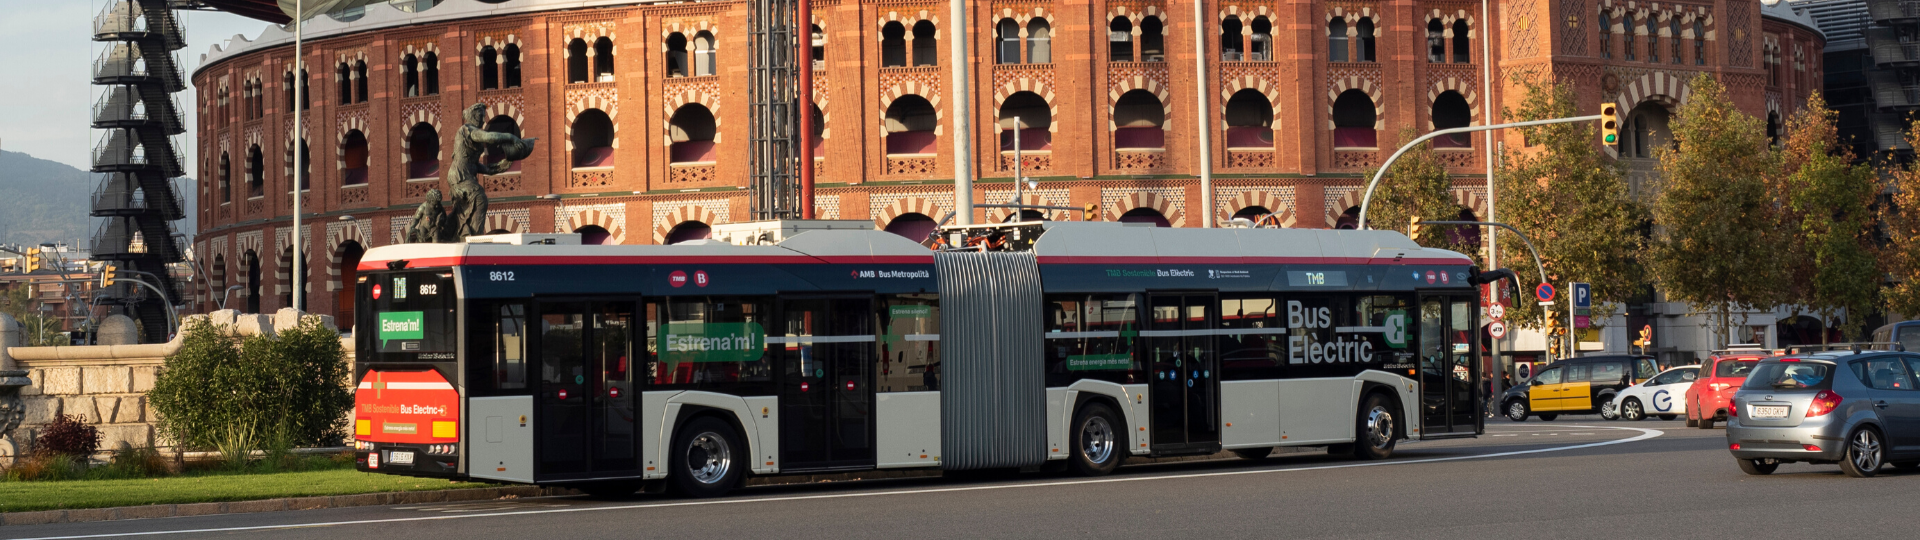 Solaris’ feats in the Spanish market. 90% of contracts concern low- and zero-emission vehicles